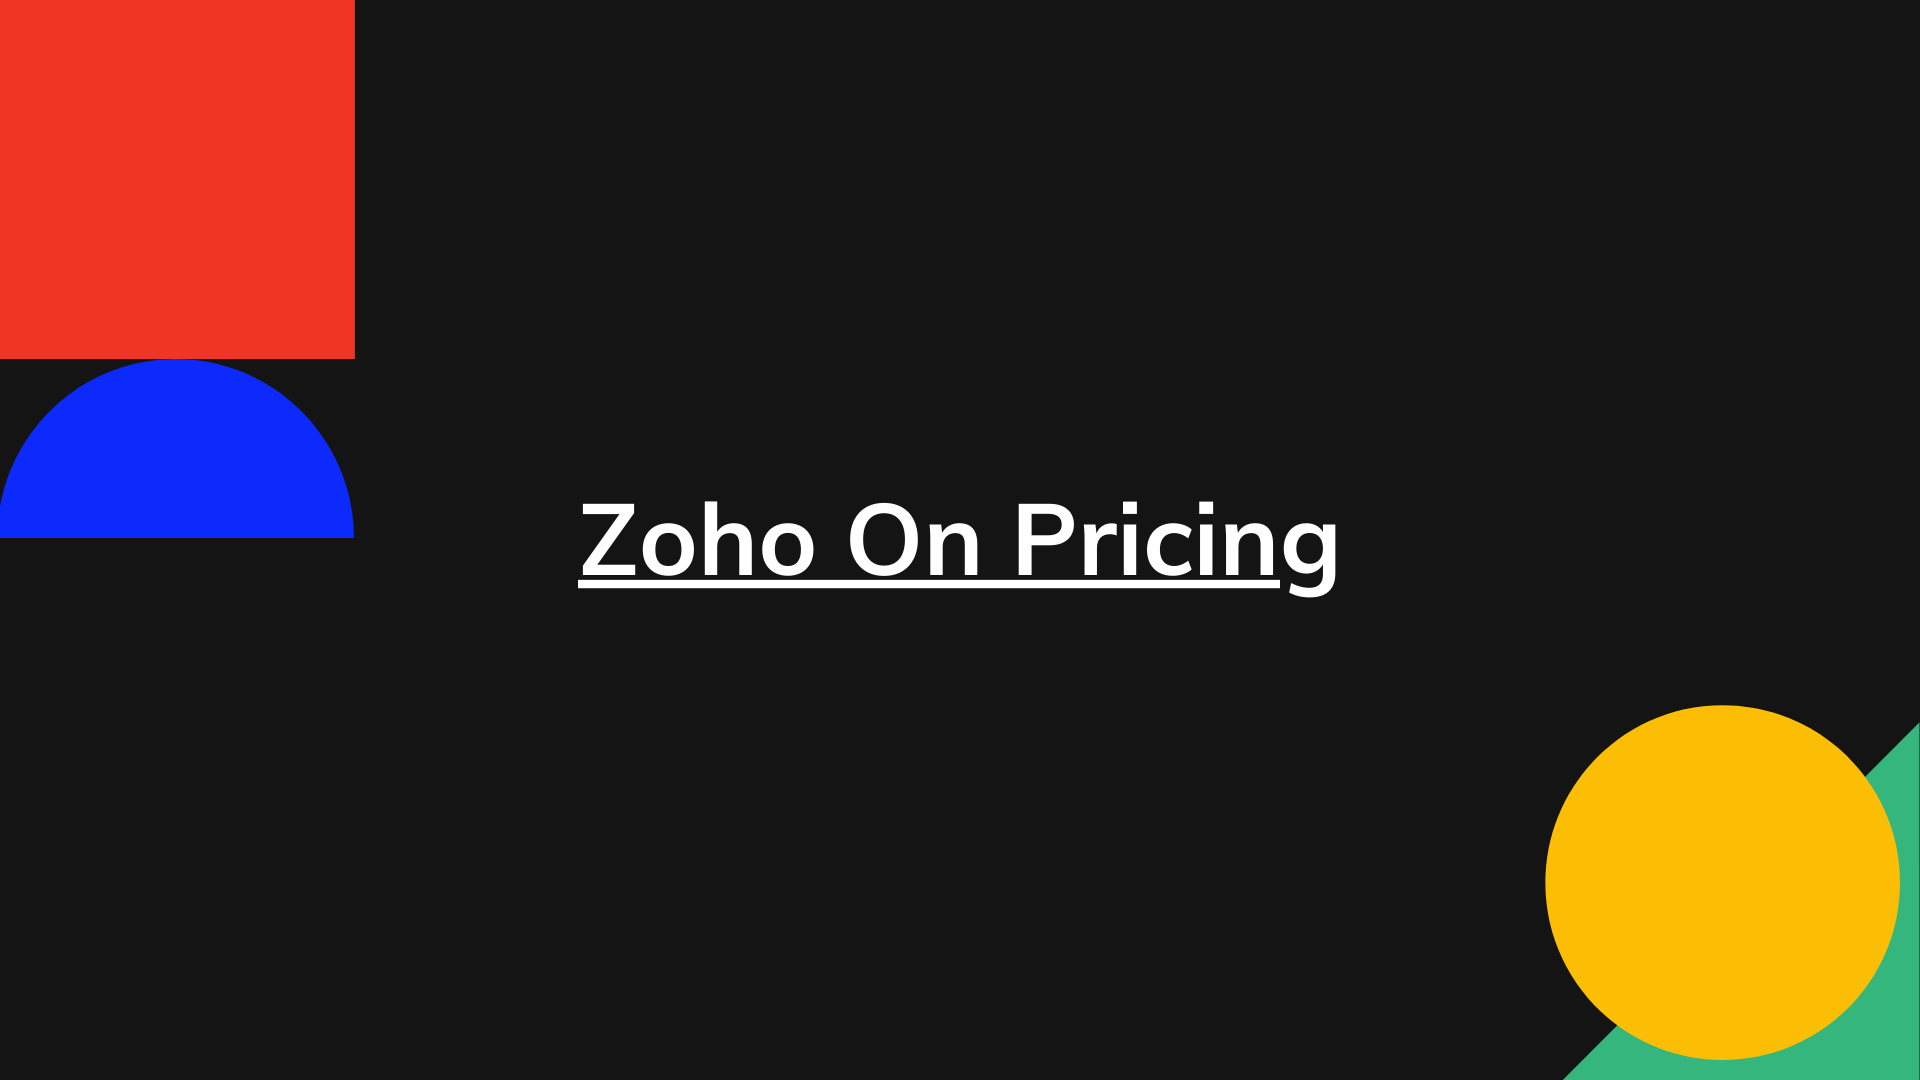 Zoho One Pricing